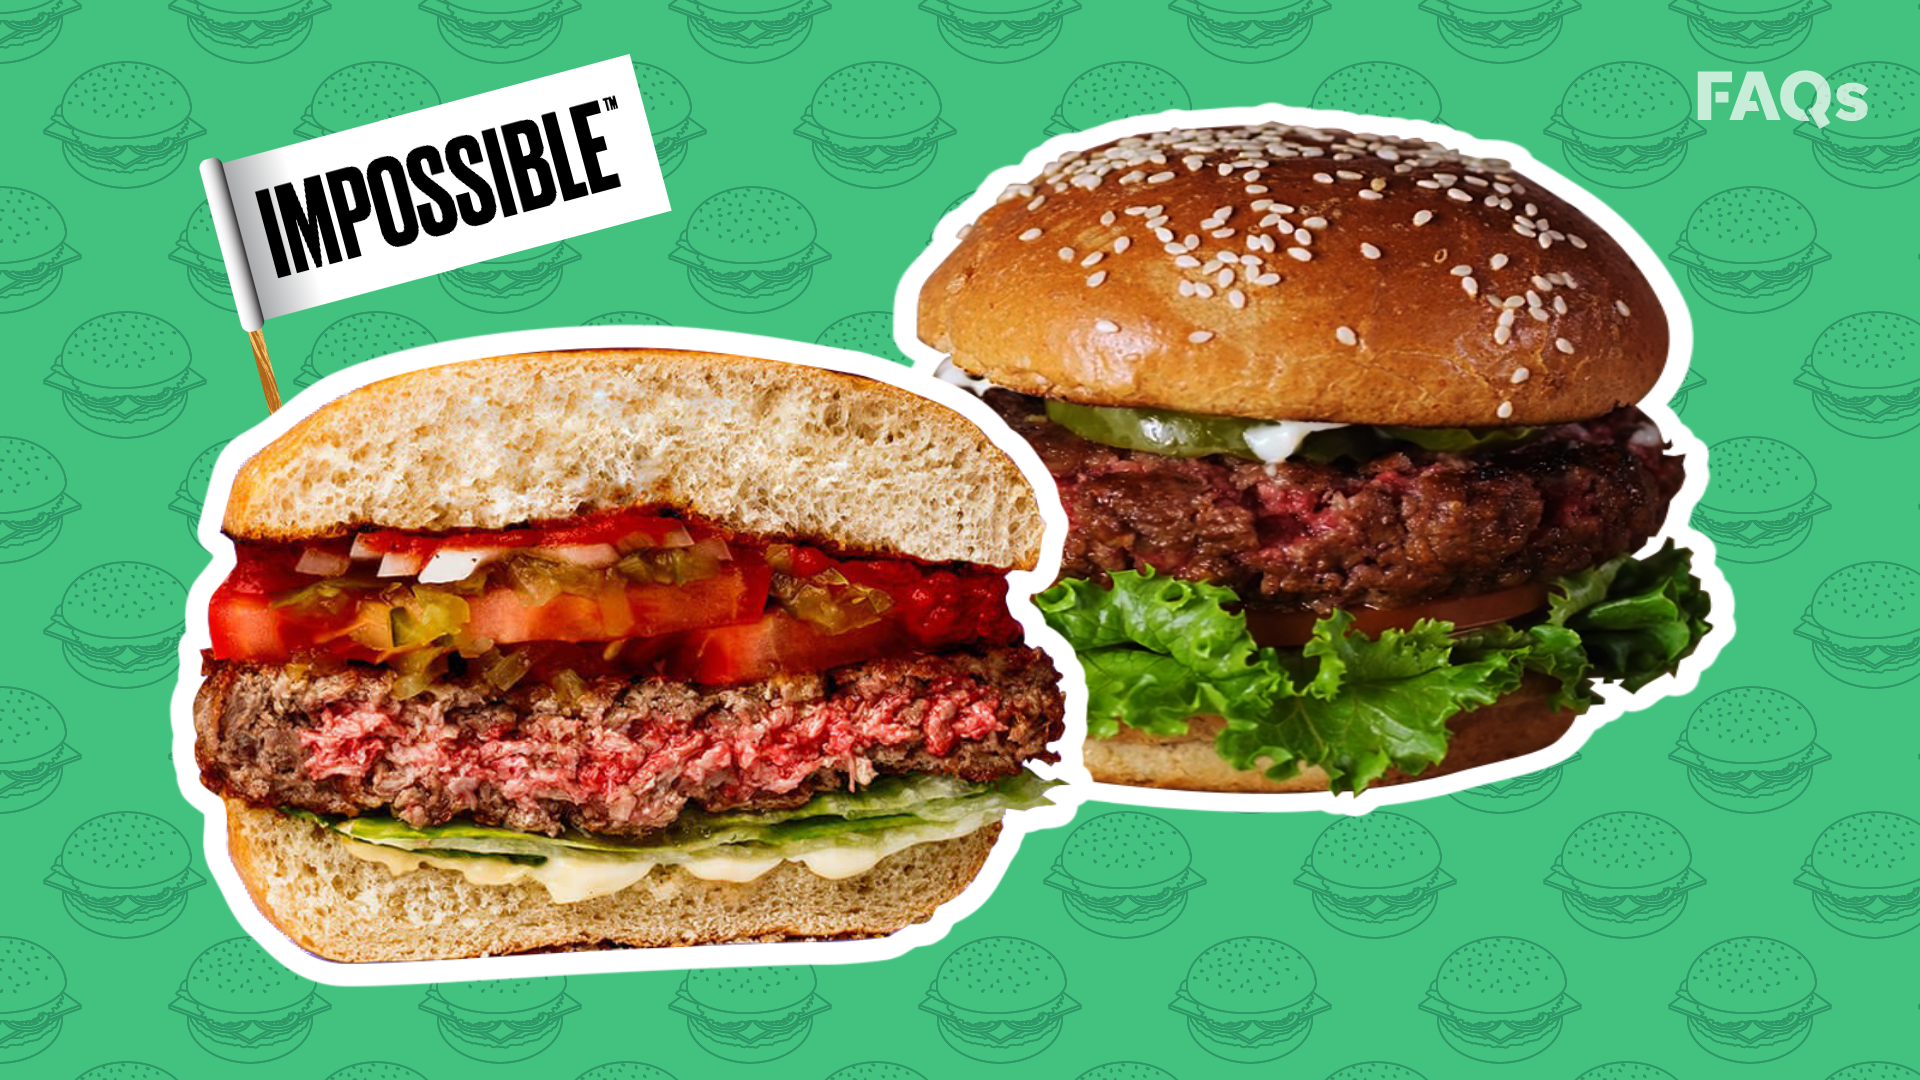 Burger King Impossible Whopper Vegan To Be Released Nationwide